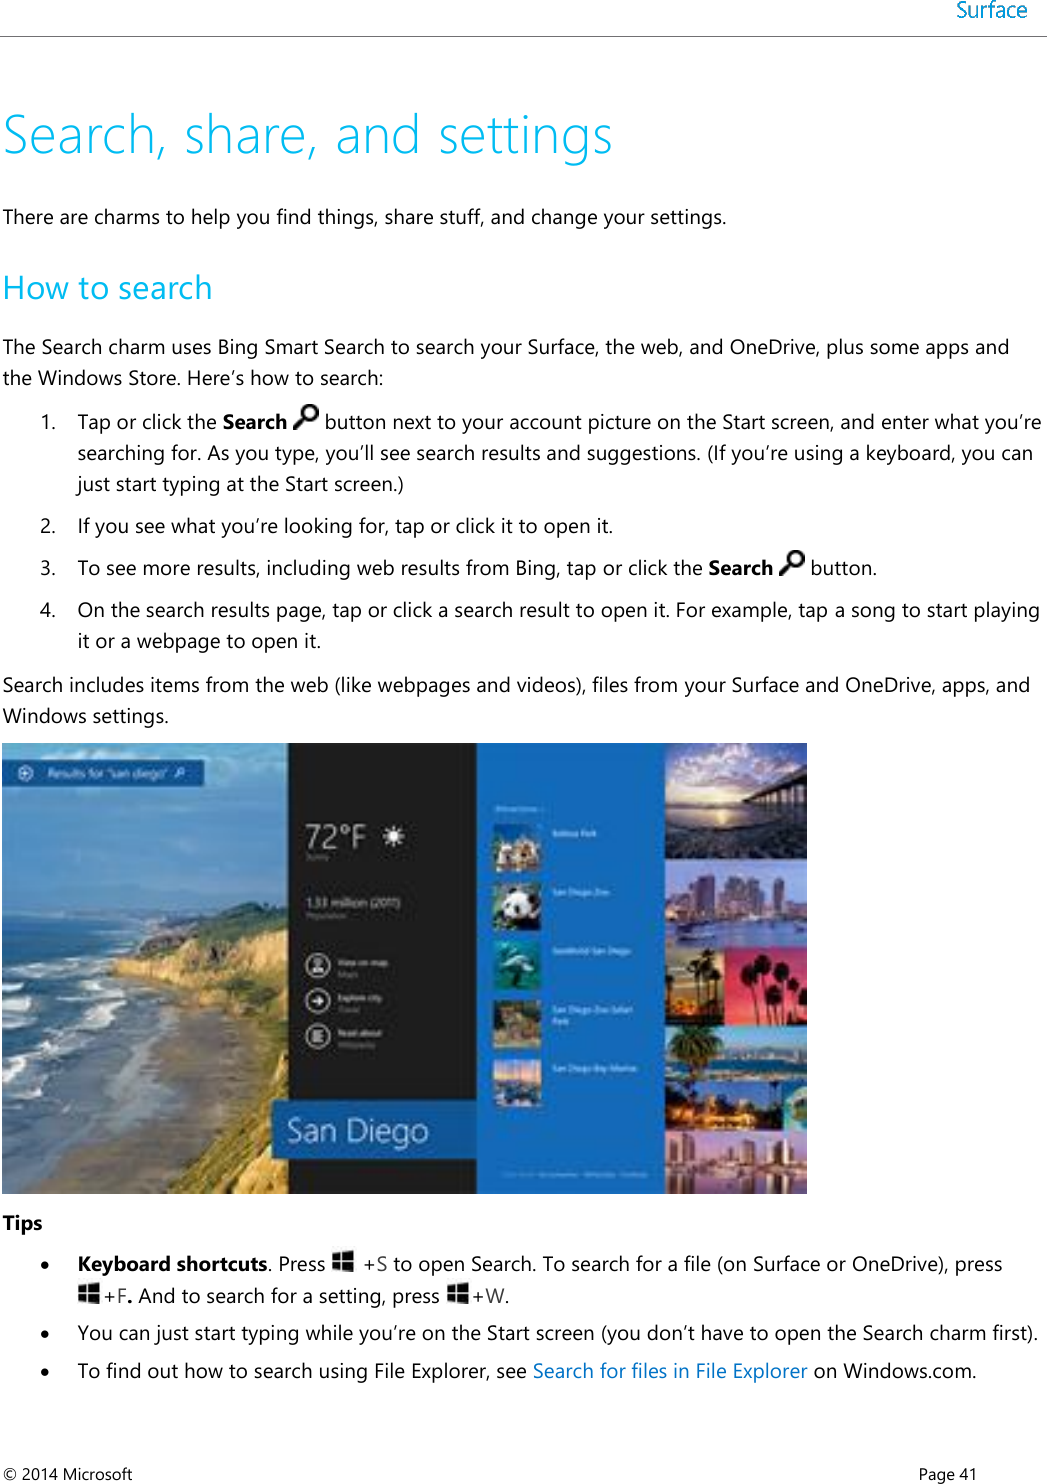  © 2014 Microsoft      Page 41  Search, share, and settings There are charms to help you find things, share stuff, and change your settings.  How to search The Search charm uses Bing Smart Search to search your Surface, the web, and OneDrive, plus some apps and the Windows Store. Here’s how to search: 1. Tap or click the Search   button next to your account picture on the Start screen, and enter what you’re searching for. As you type, you’ll see search results and suggestions. (If you’re using a keyboard, you can just start typing at the Start screen.) 2. If you see what you’re looking for, tap or click it to open it.  3. To see more results, including web results from Bing, tap or click the Search   button. 4. On the search results page, tap or click a search result to open it. For example, tap a song to start playing it or a webpage to open it. Search includes items from the web (like webpages and videos), files from your Surface and OneDrive, apps, and Windows settings.   Tips  Keyboard shortcuts. Press   +S to open Search. To search for a file (on Surface or OneDrive), press +F. And to search for a setting, press  +W.  You can just start typing while you’re on the Start screen (you don’t have to open the Search charm first).   To find out how to search using File Explorer, see Search for files in File Explorer on Windows.com.  